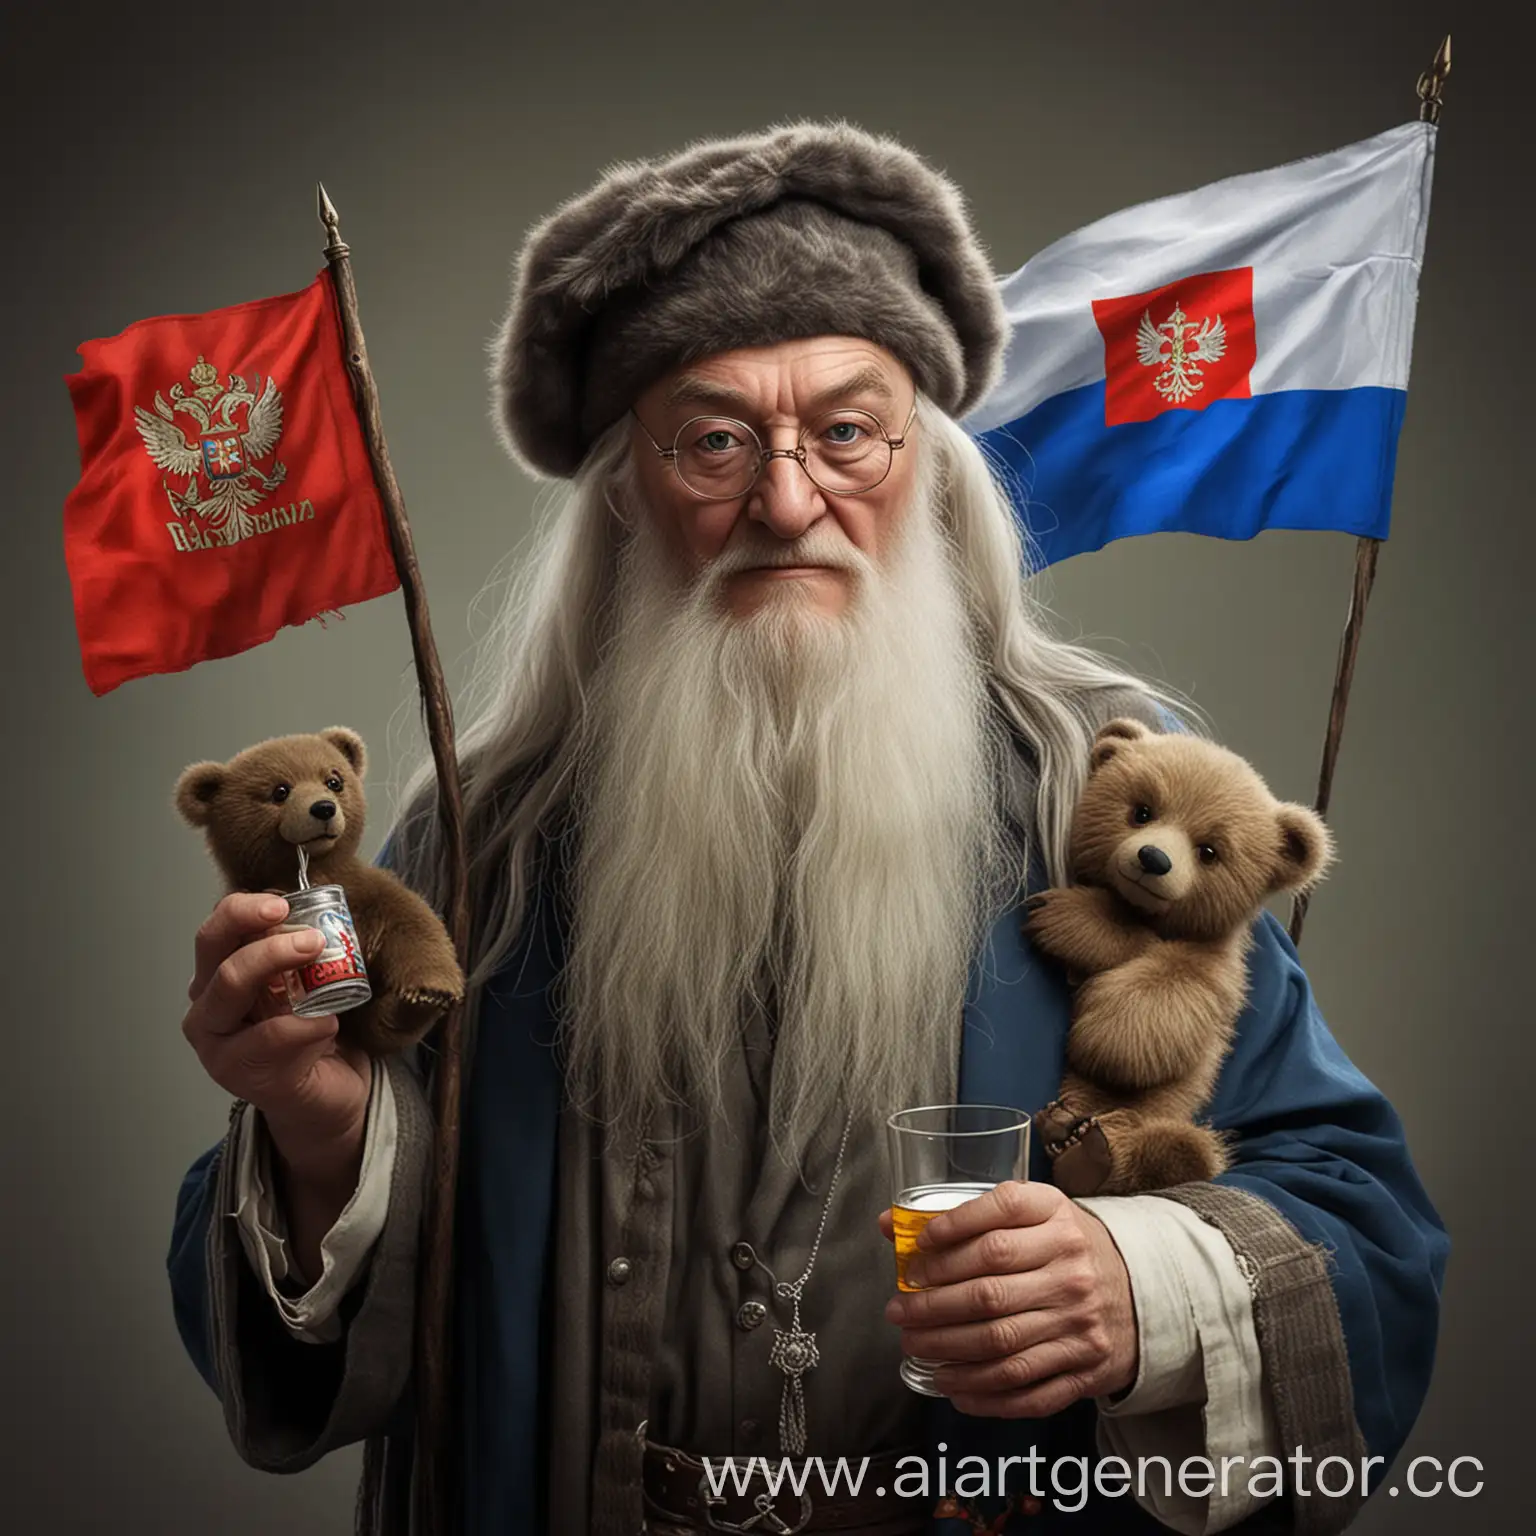 Russian-Dumbledore-Holding-Vodka-Bear-and-Flag-of-Russia